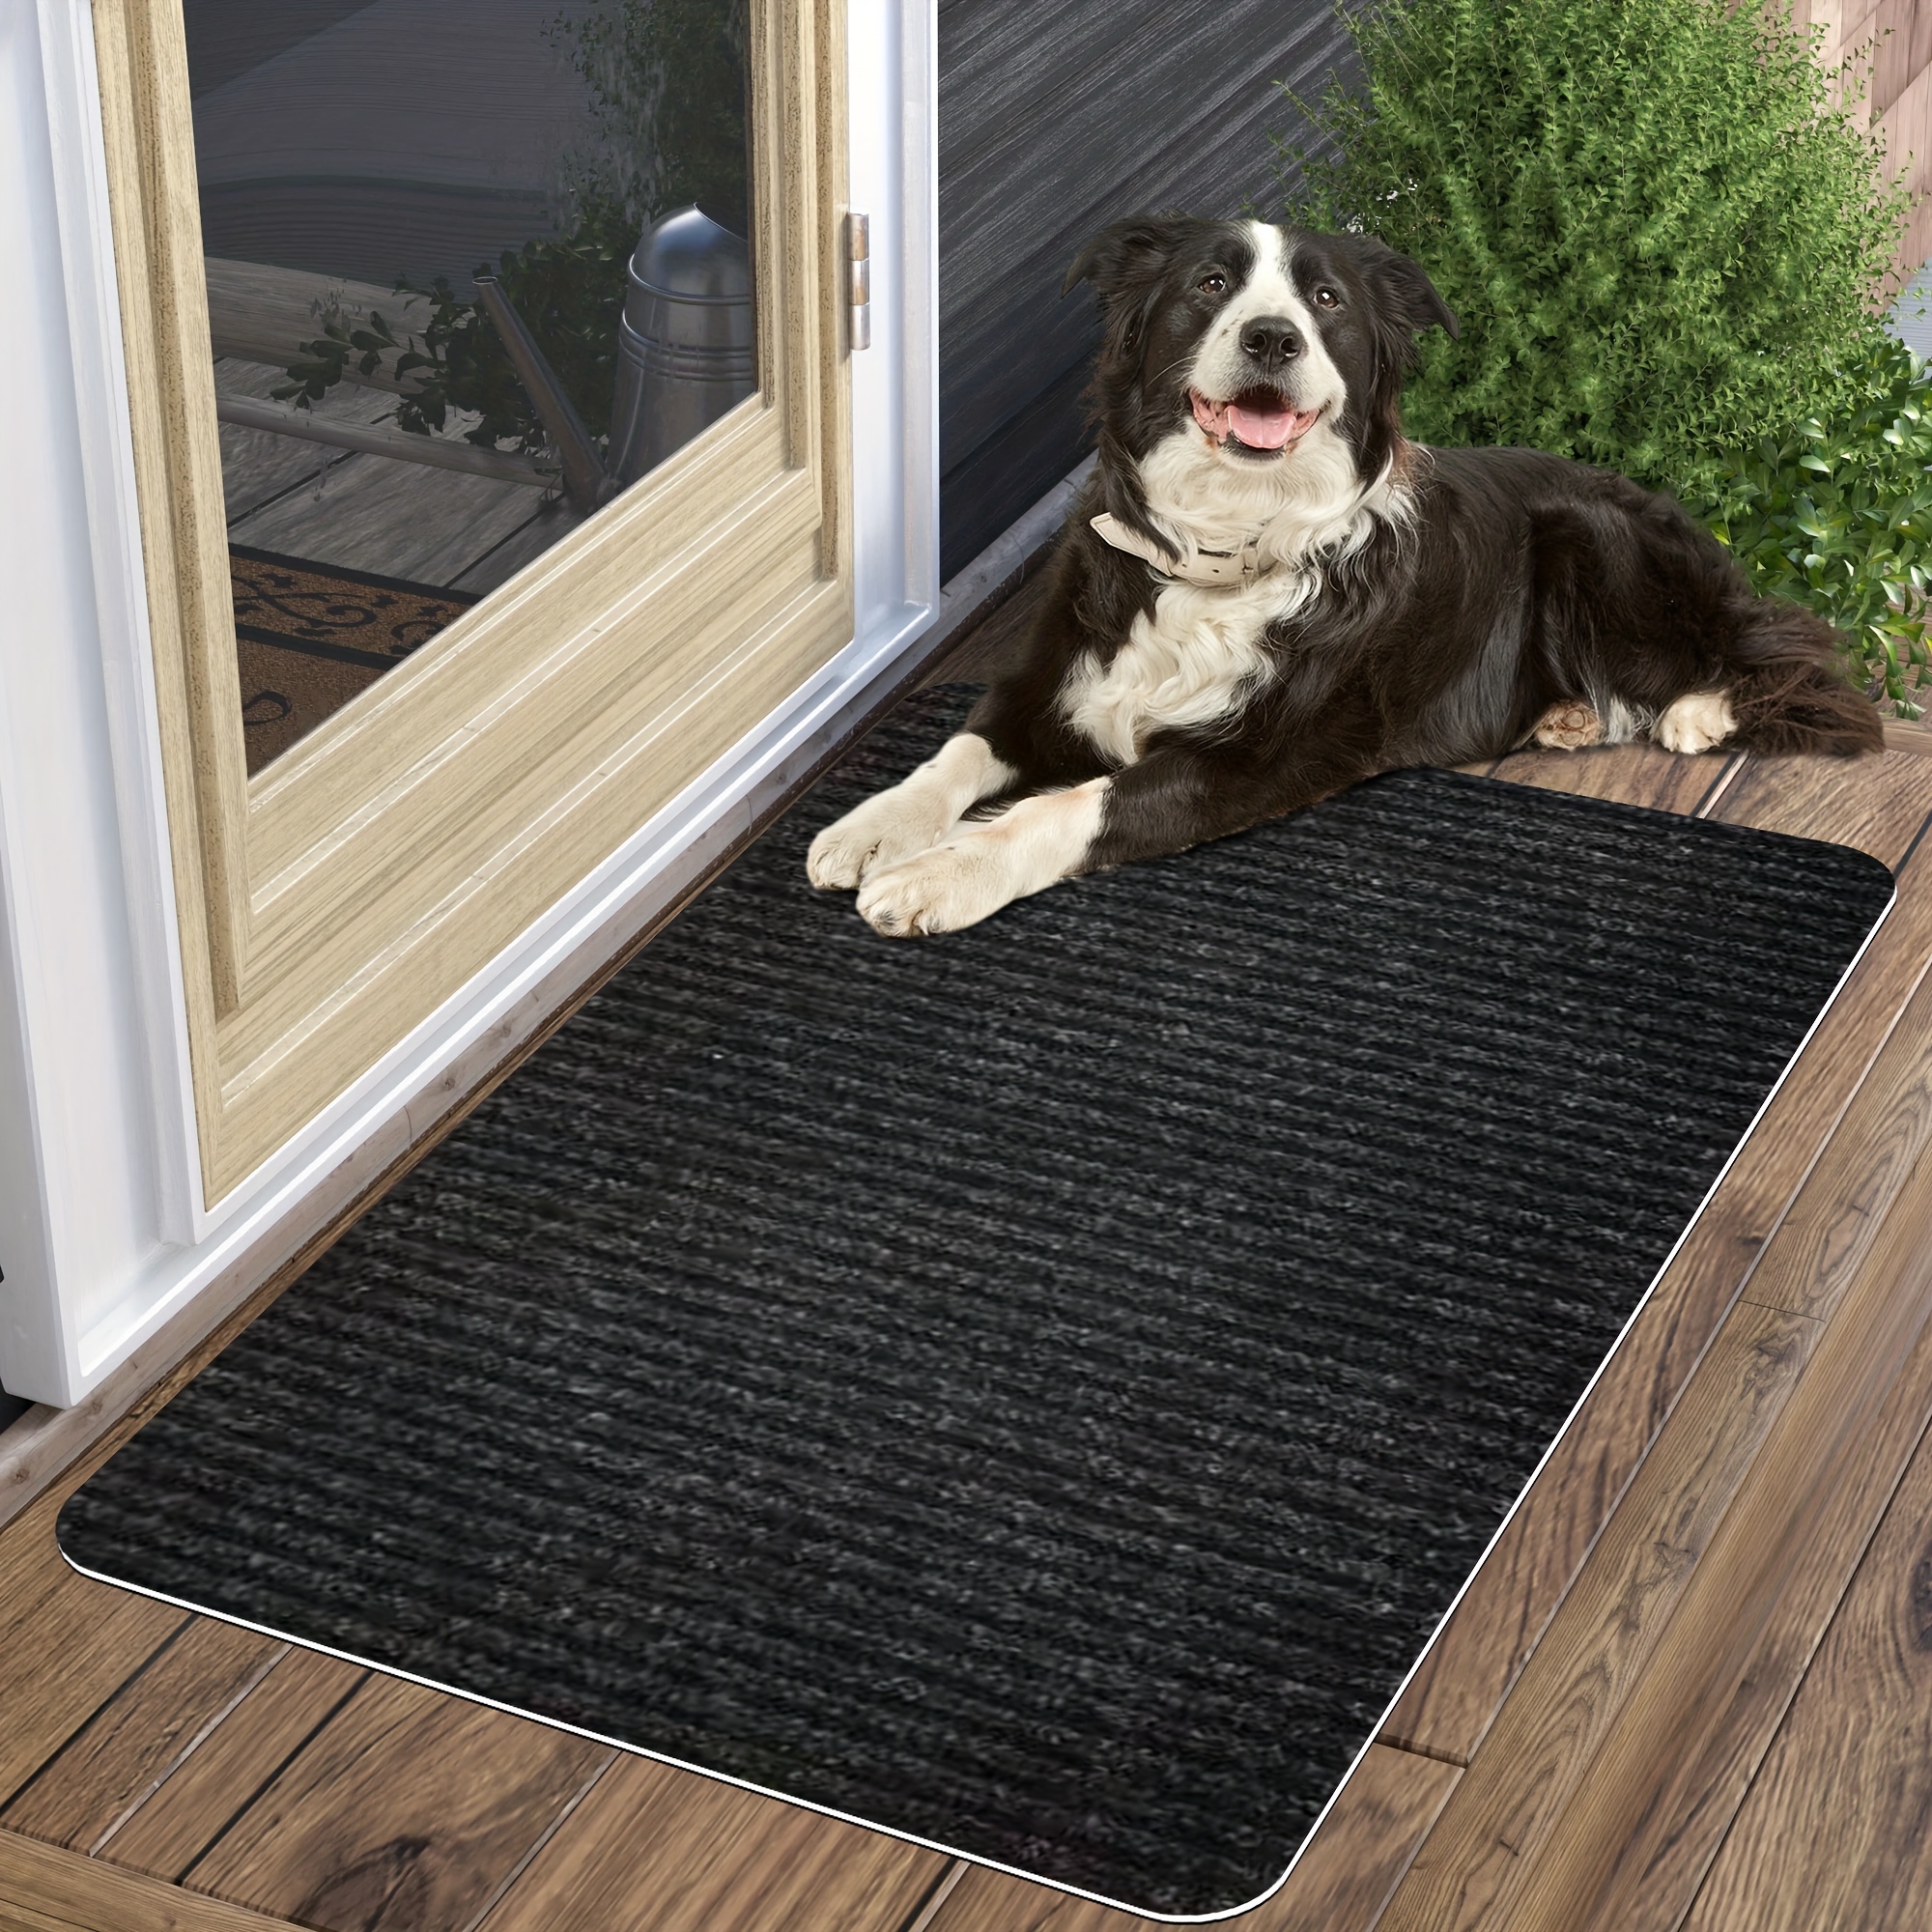 

1pc Ultra-absorbent Non-slip Door Mat - Durable, Machine Washable For Dust, Water & Sand - Perfect For Entryways, Bedrooms, Kitchens & Offices